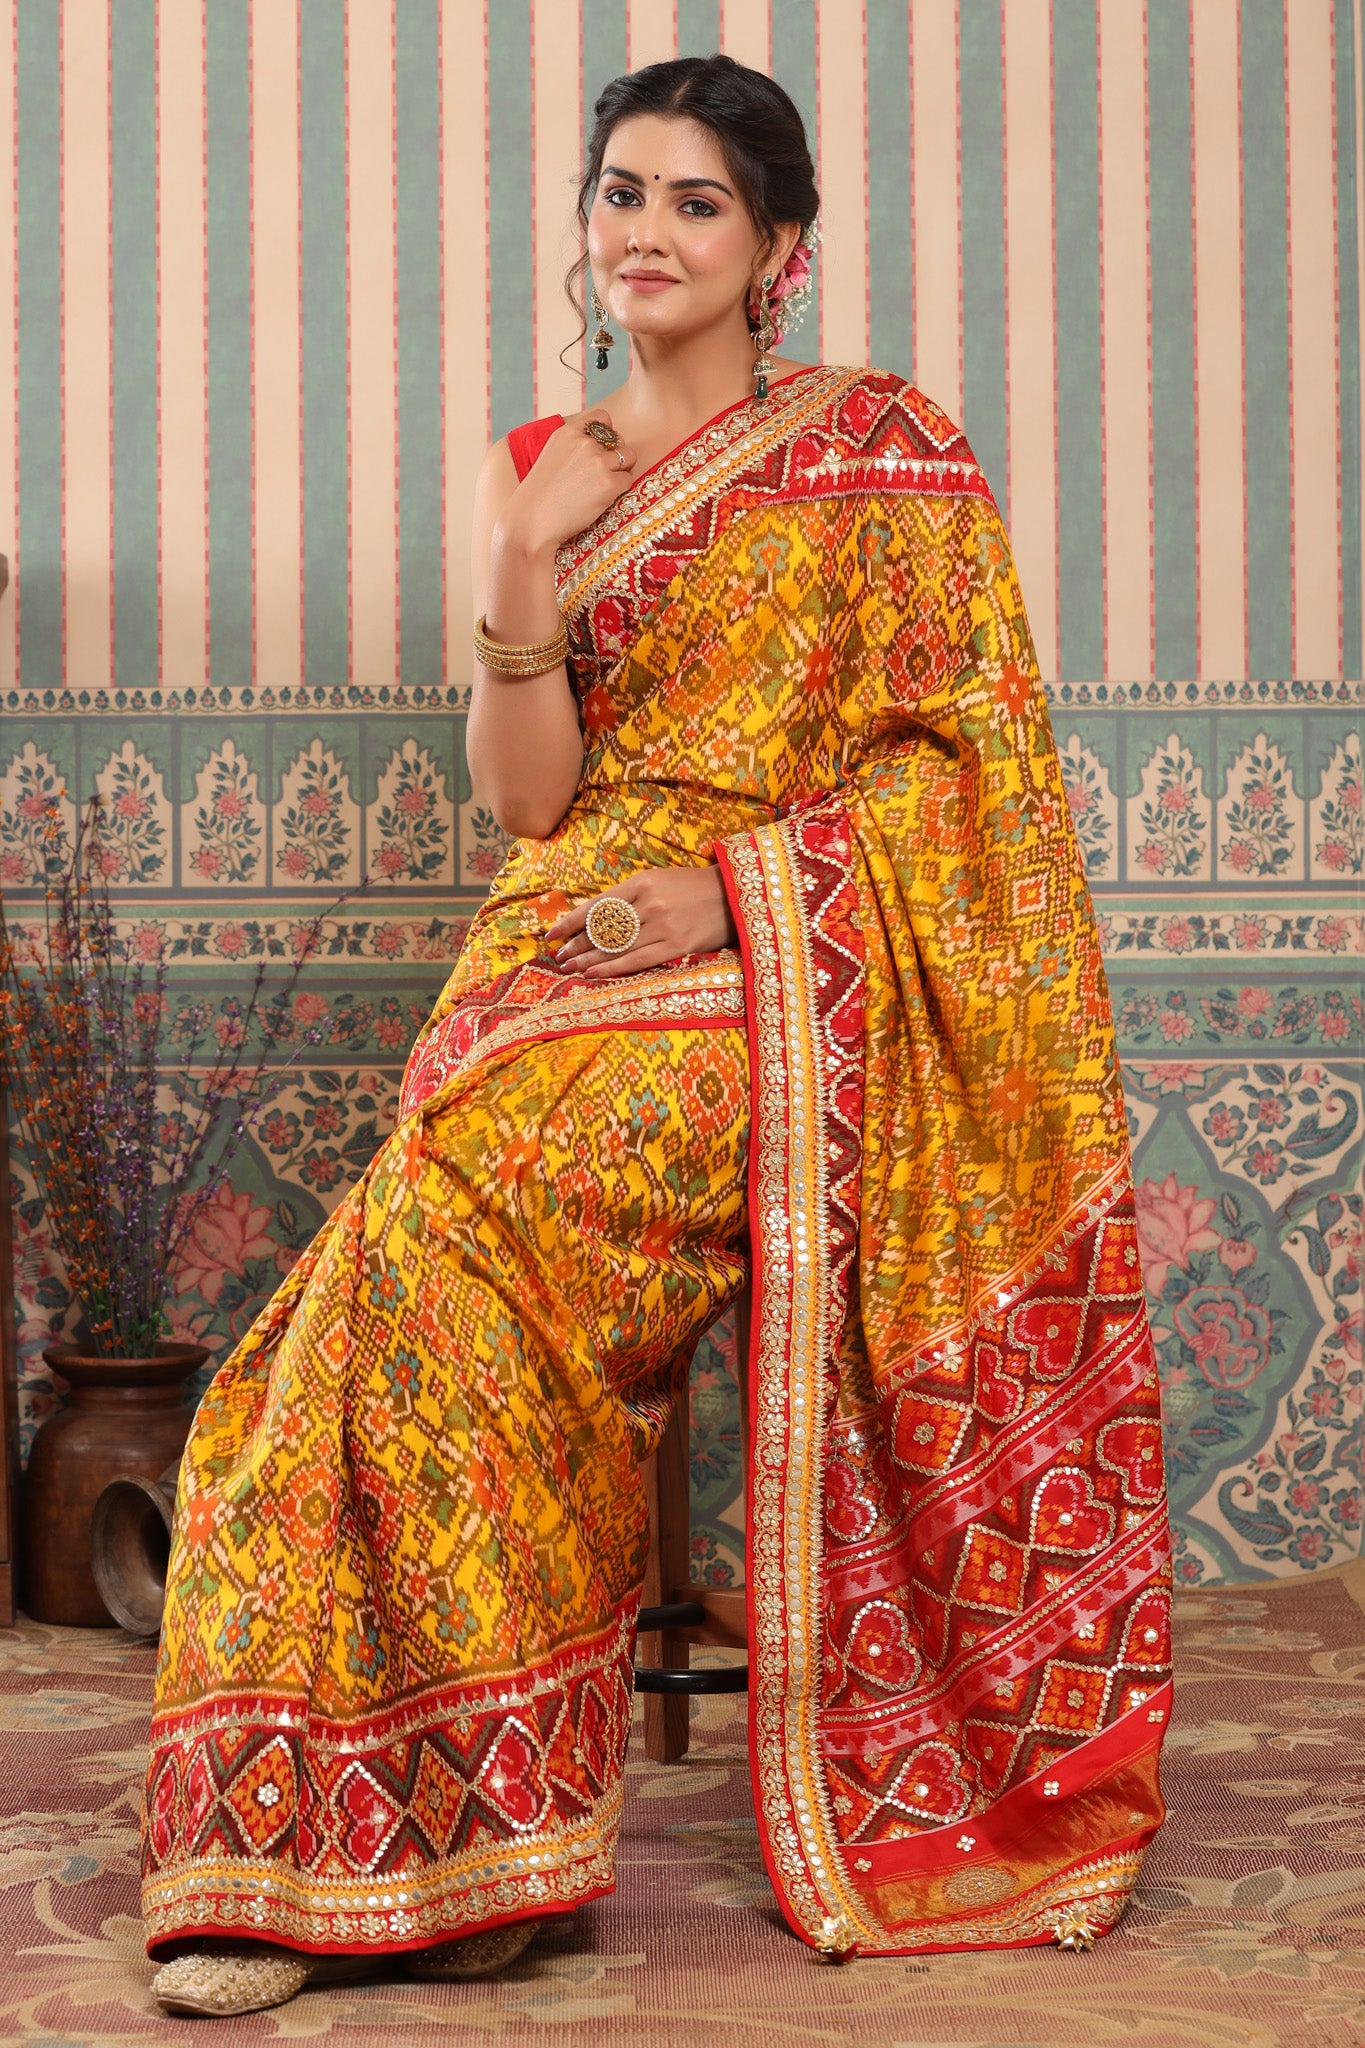 Buy yellow Patola silk sari online in USA with red embroidered border. Make a fashion statement at weddings with stunning designer sarees, embroidered sarees with blouse, wedding sarees, handloom sarees from Pure Elegance Indian fashion store in USA.-Patola